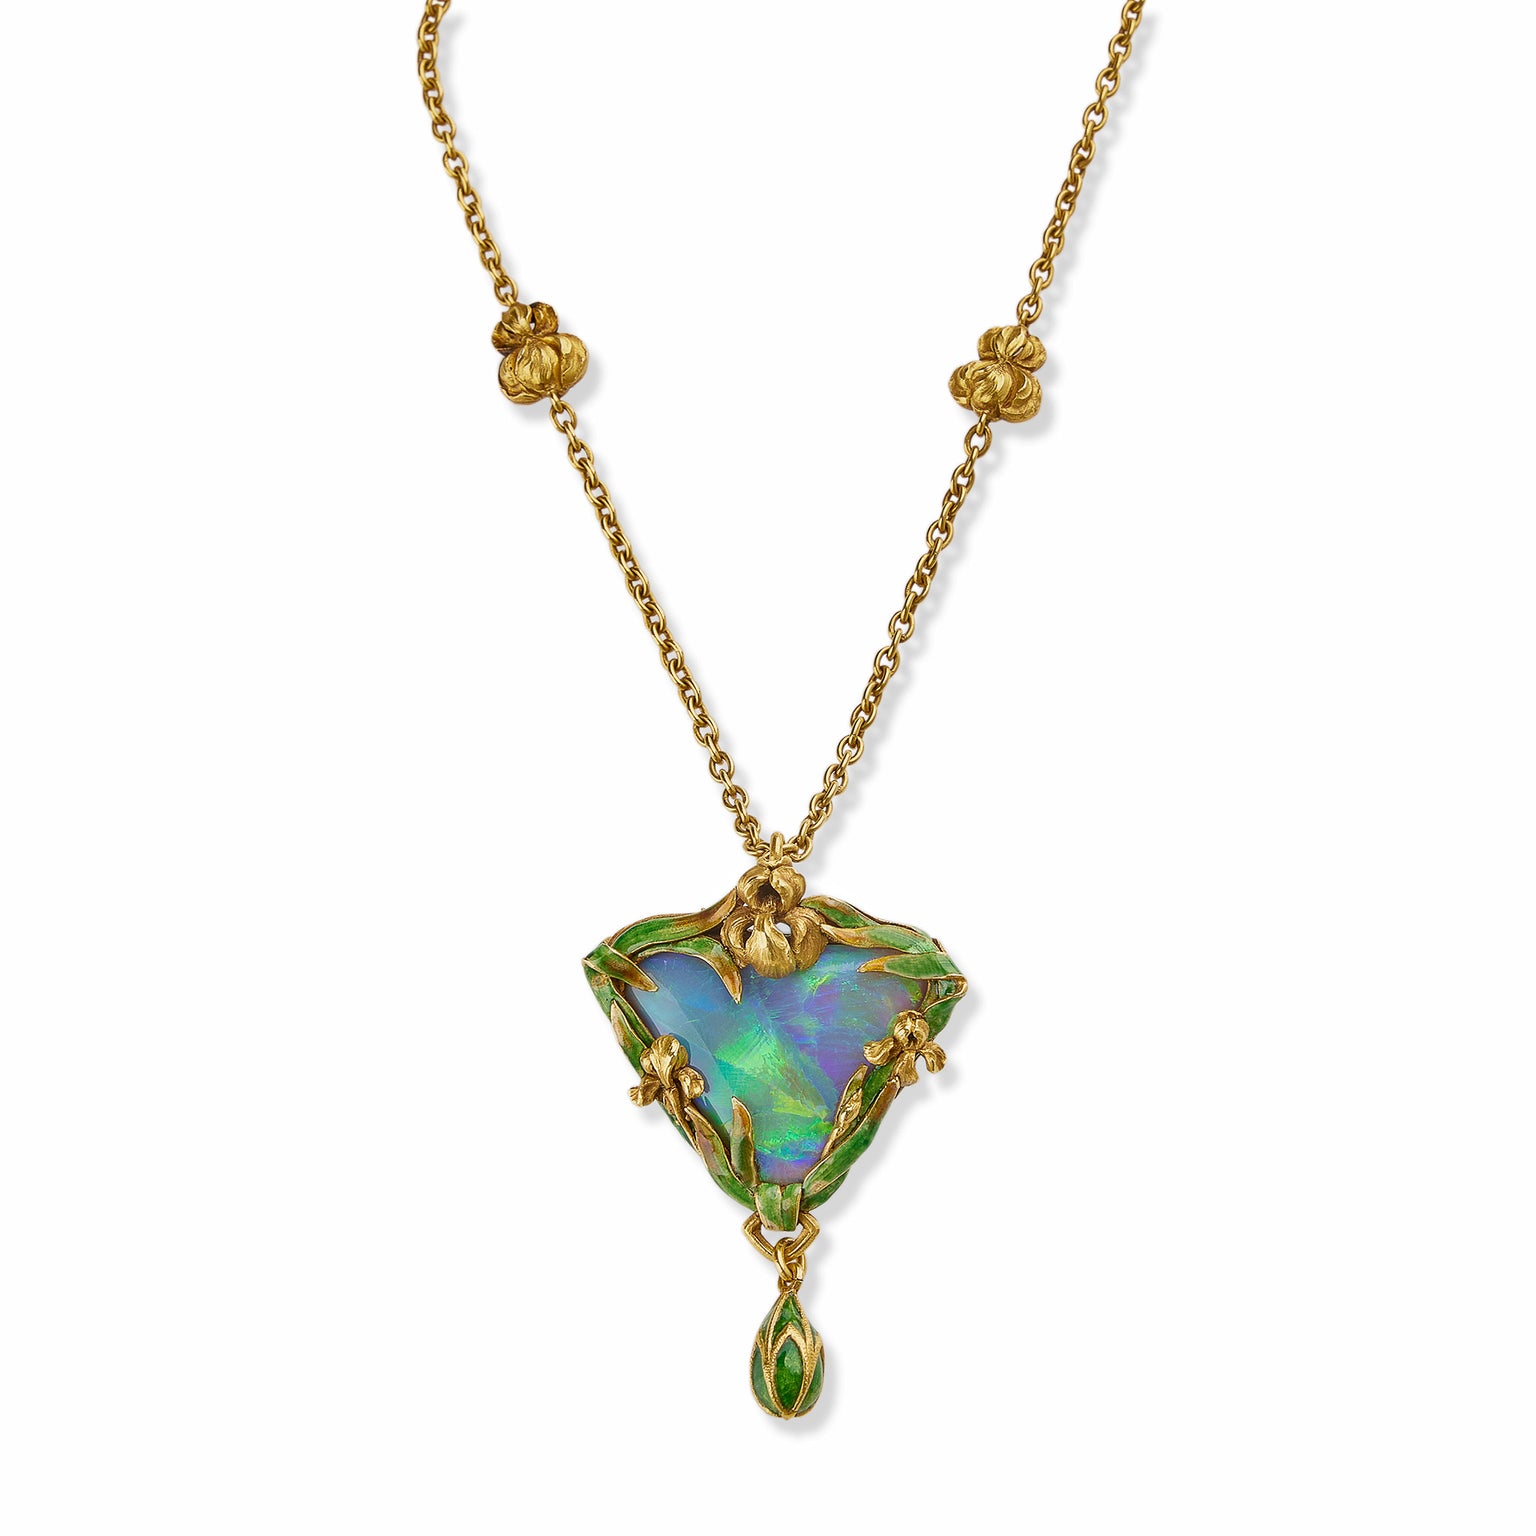 Macklowe Gallery | Antique and Vintage Necklaces & Pendants ...